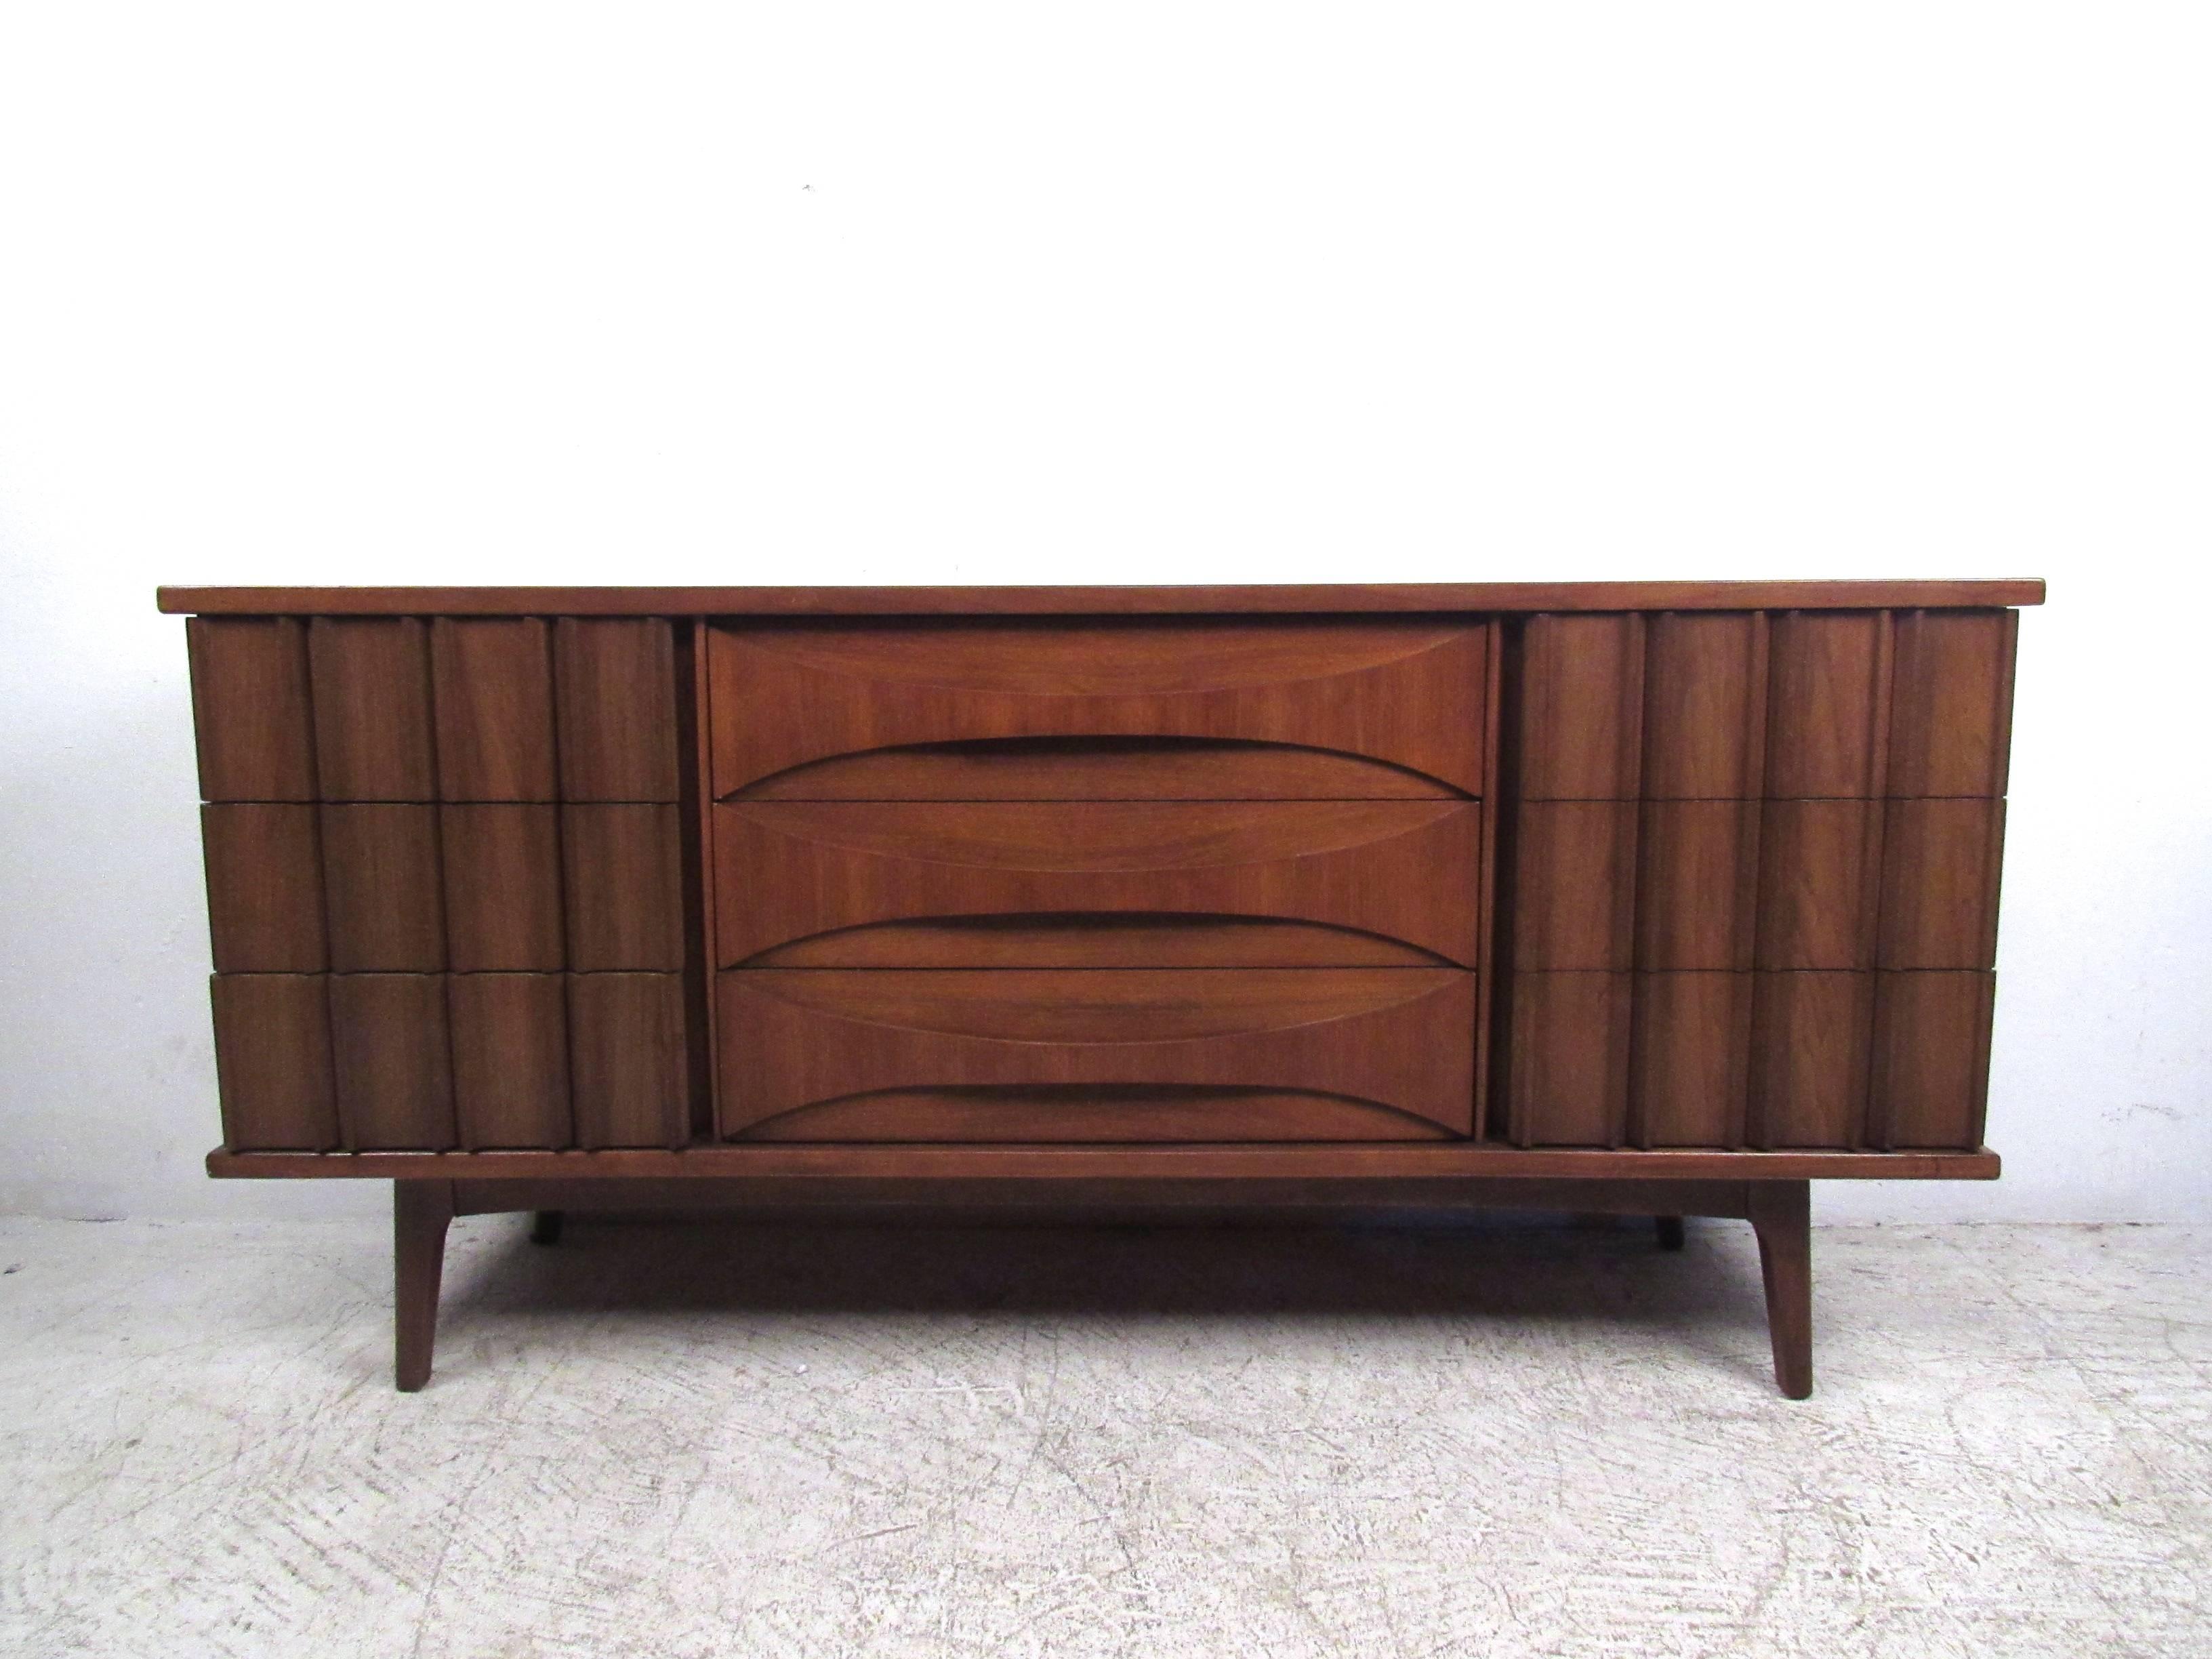 This three-piece matching bedroom set features unique Mid-Century walnut construction, including sculpted drawer fronts, tapered legs and plenty of stylish storage. Highboy Dimensions: 39 W 19.25 D, 45 H. Long Dresser: 64 W 18.5 31 H. Nightstand: 24